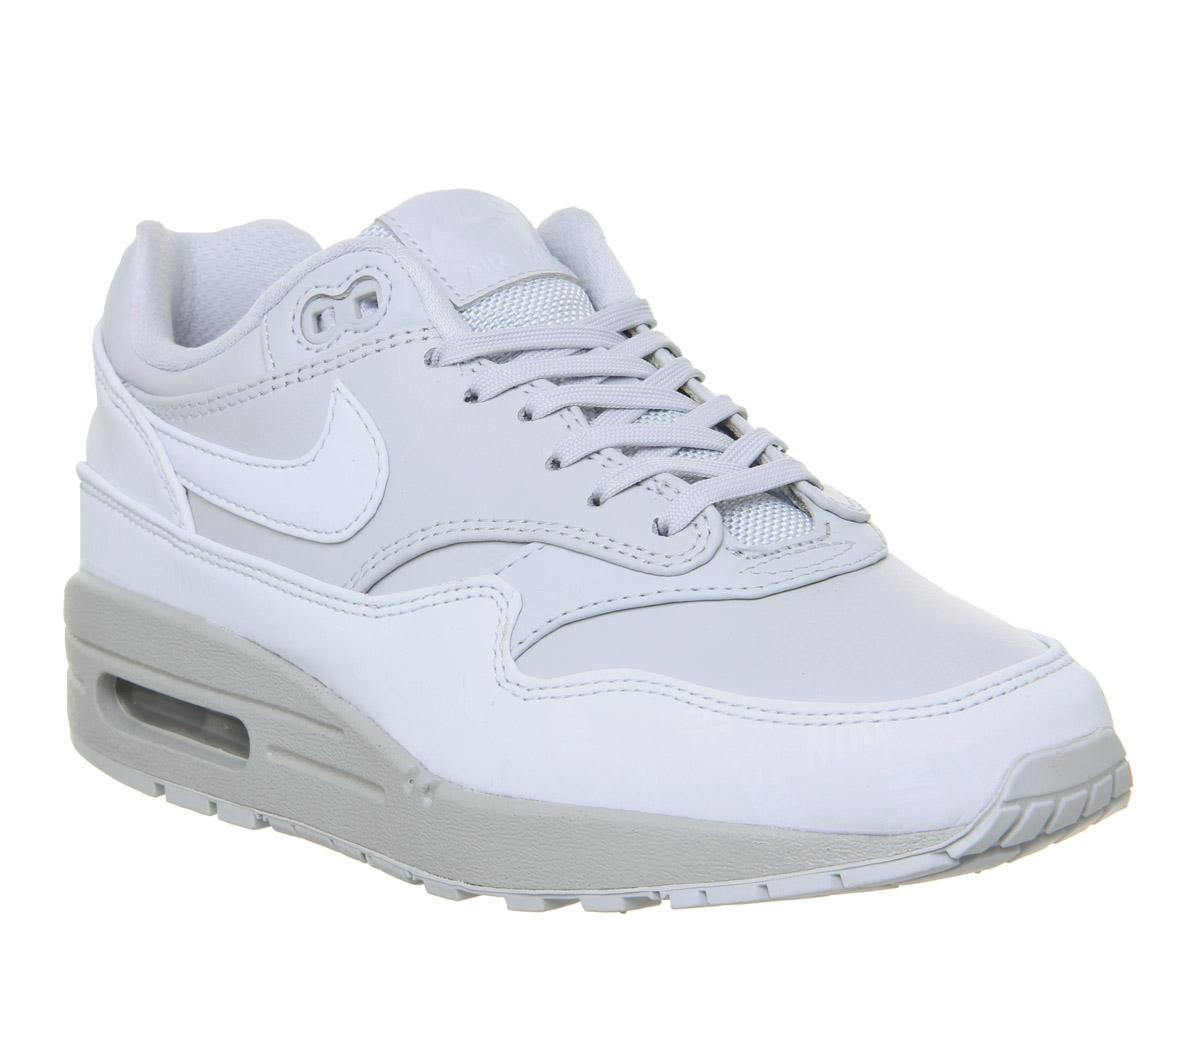 Arne fricción Actual Nike Air Max 1 Trainers Pure Platinum Lx - Women's Trainers